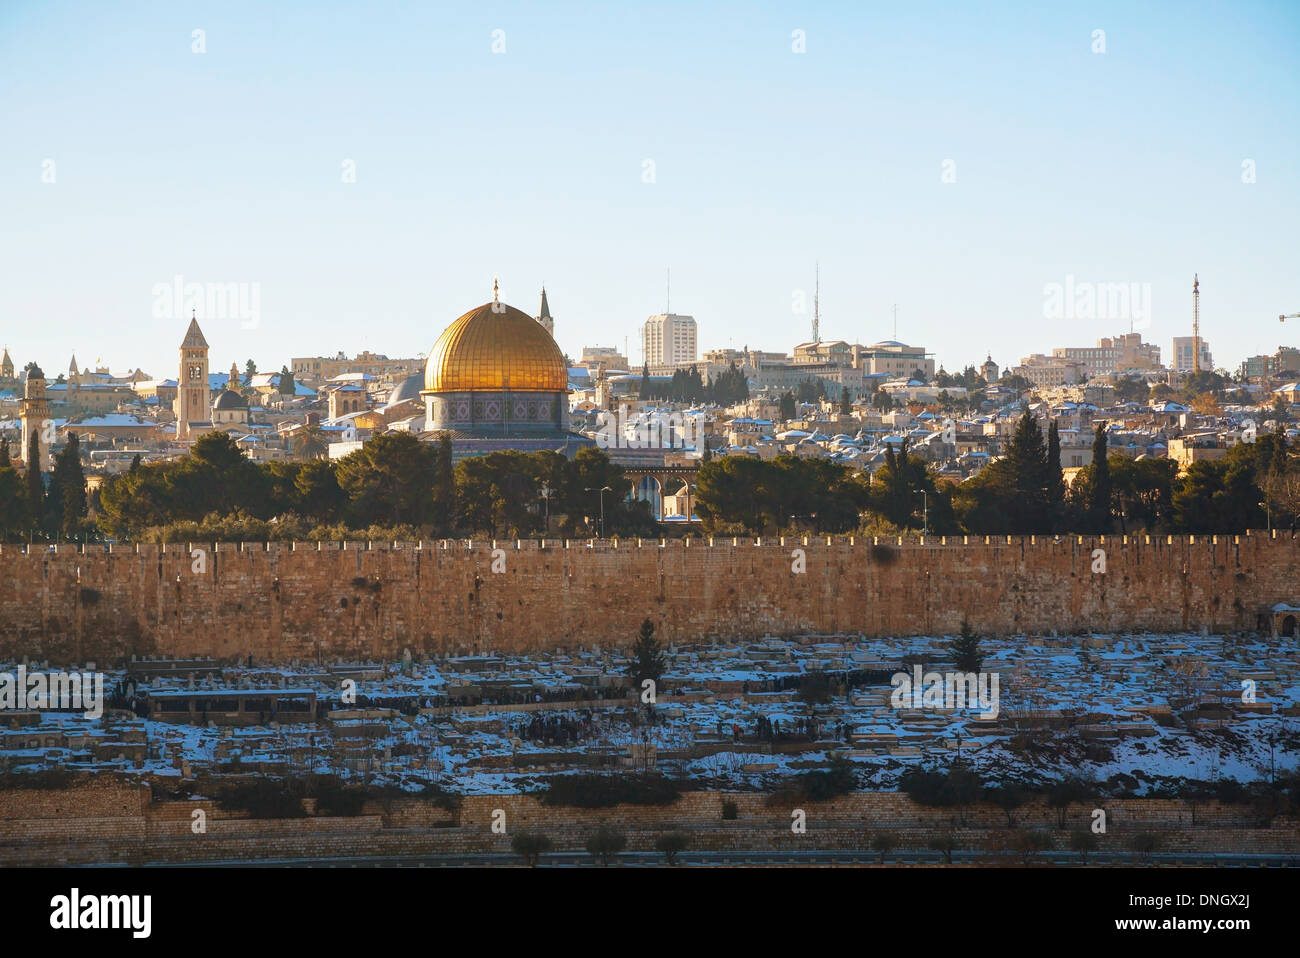 Overview of Old City in Jerusalem, Israel with The Golden Dome Mosque Stock Photo